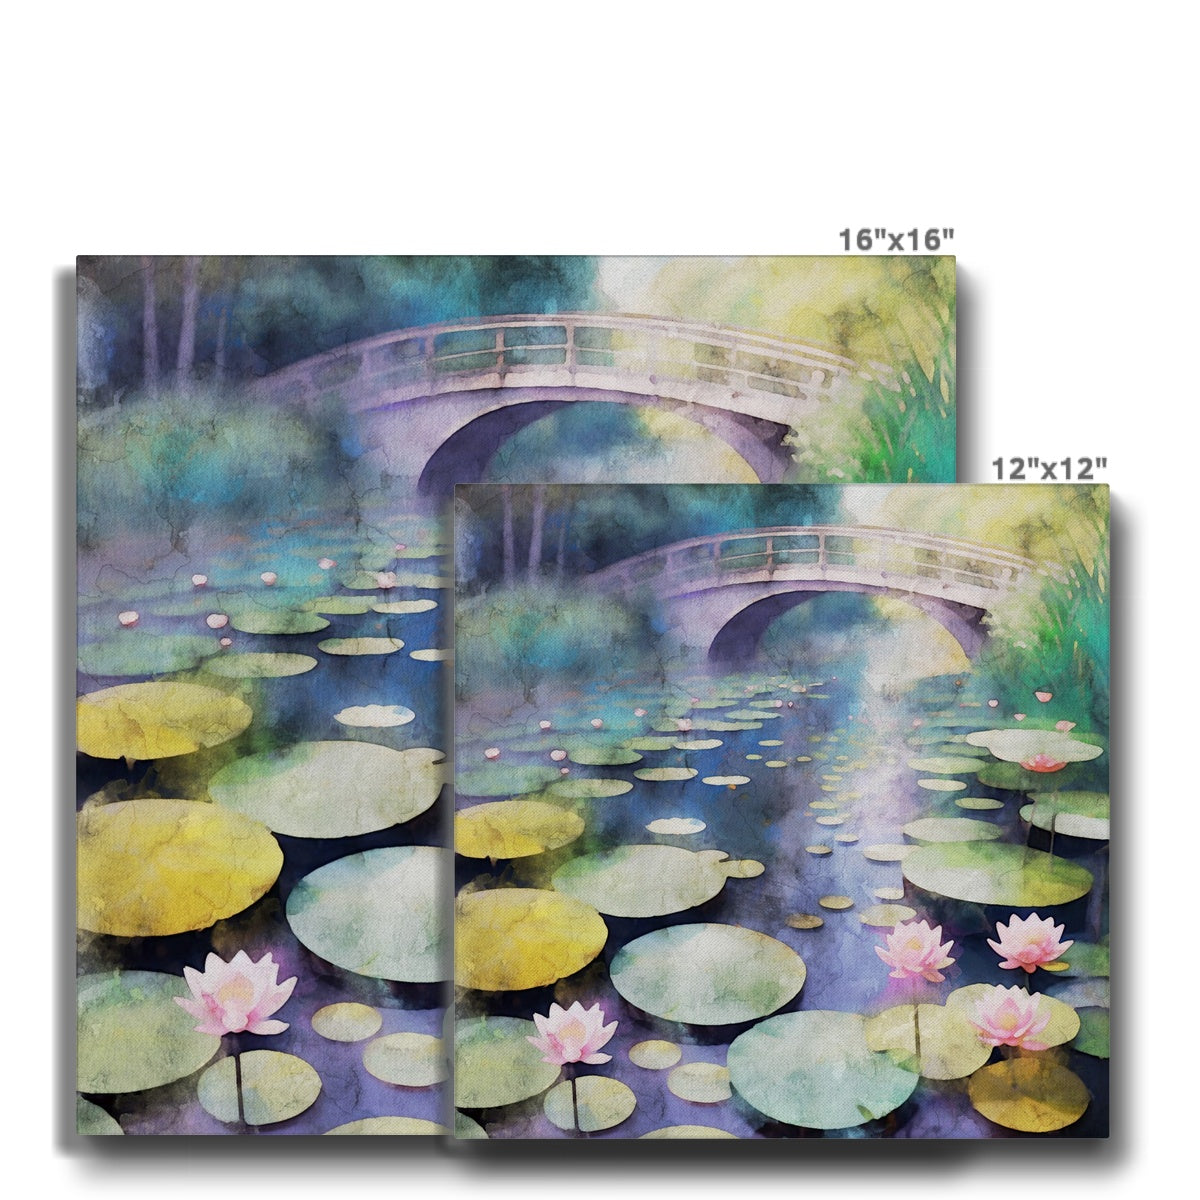 Charming Monet Water Lilies Painting Canvas